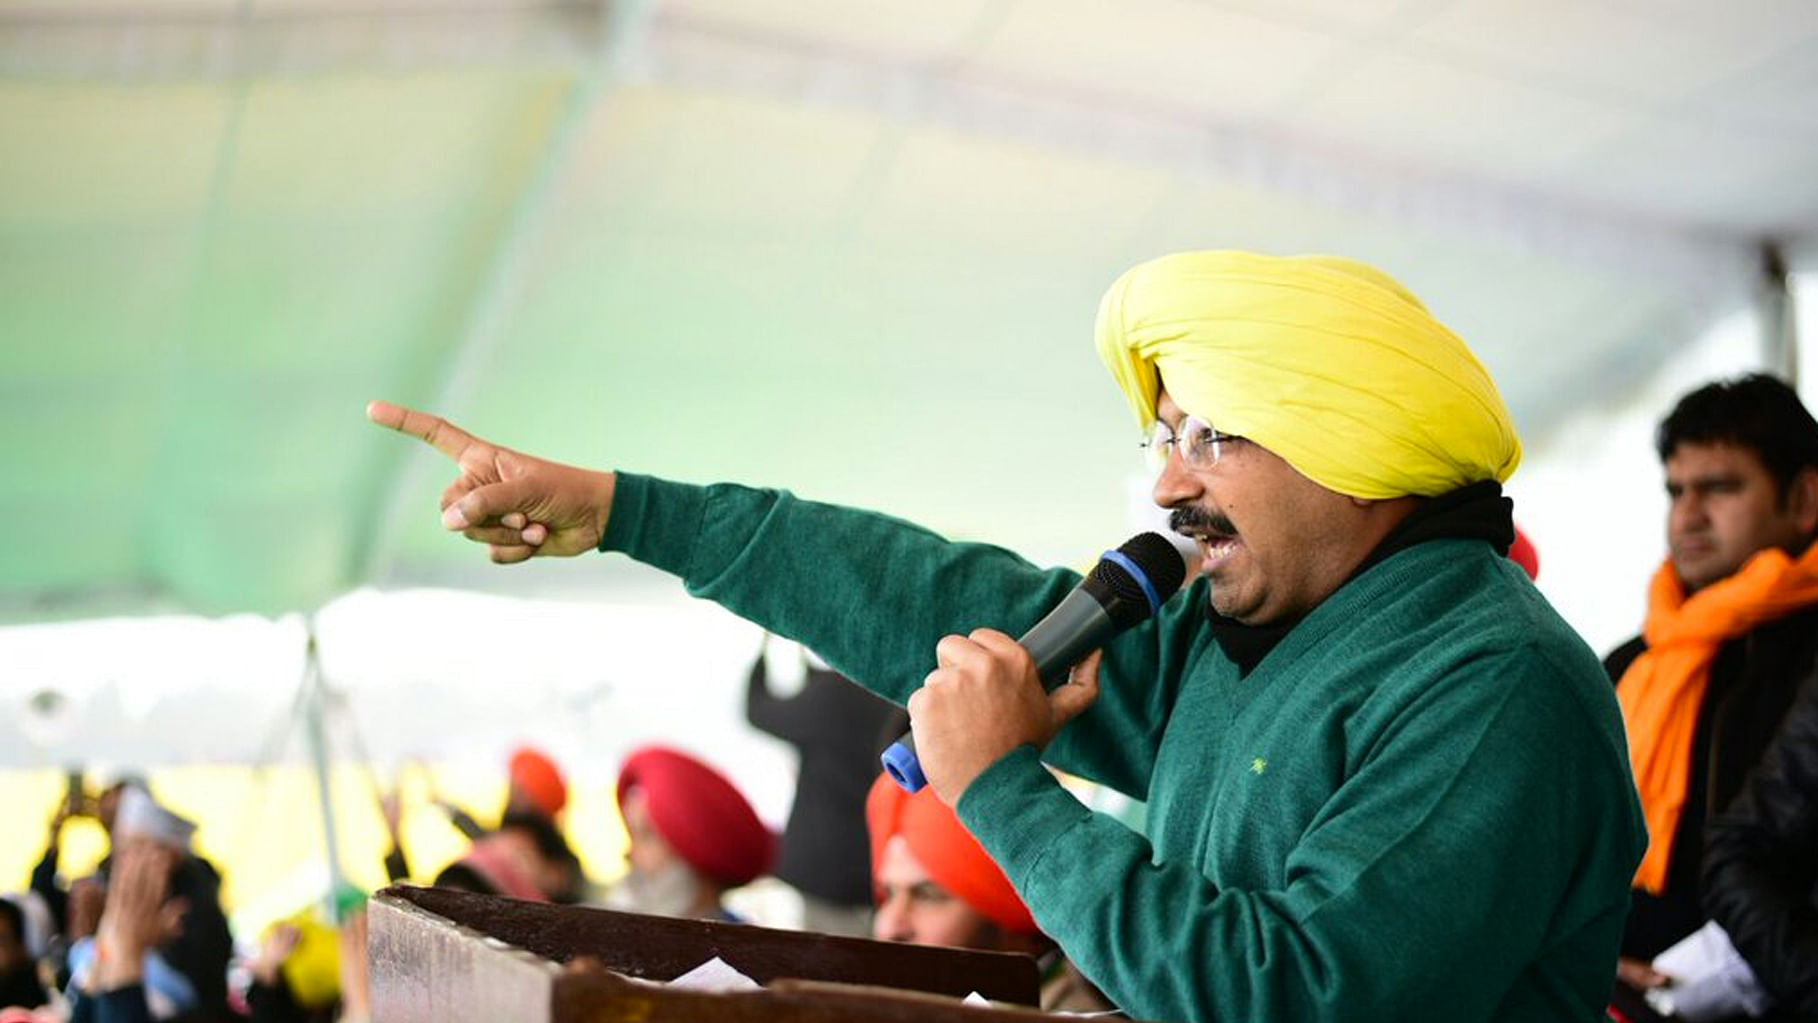 Arvind Kejriwal addressing a rally in Punjab. (Photo Courtesy: Twitter/<a href="https://twitter.com/AamAadmiParty">@AamAadmiParty)</a>